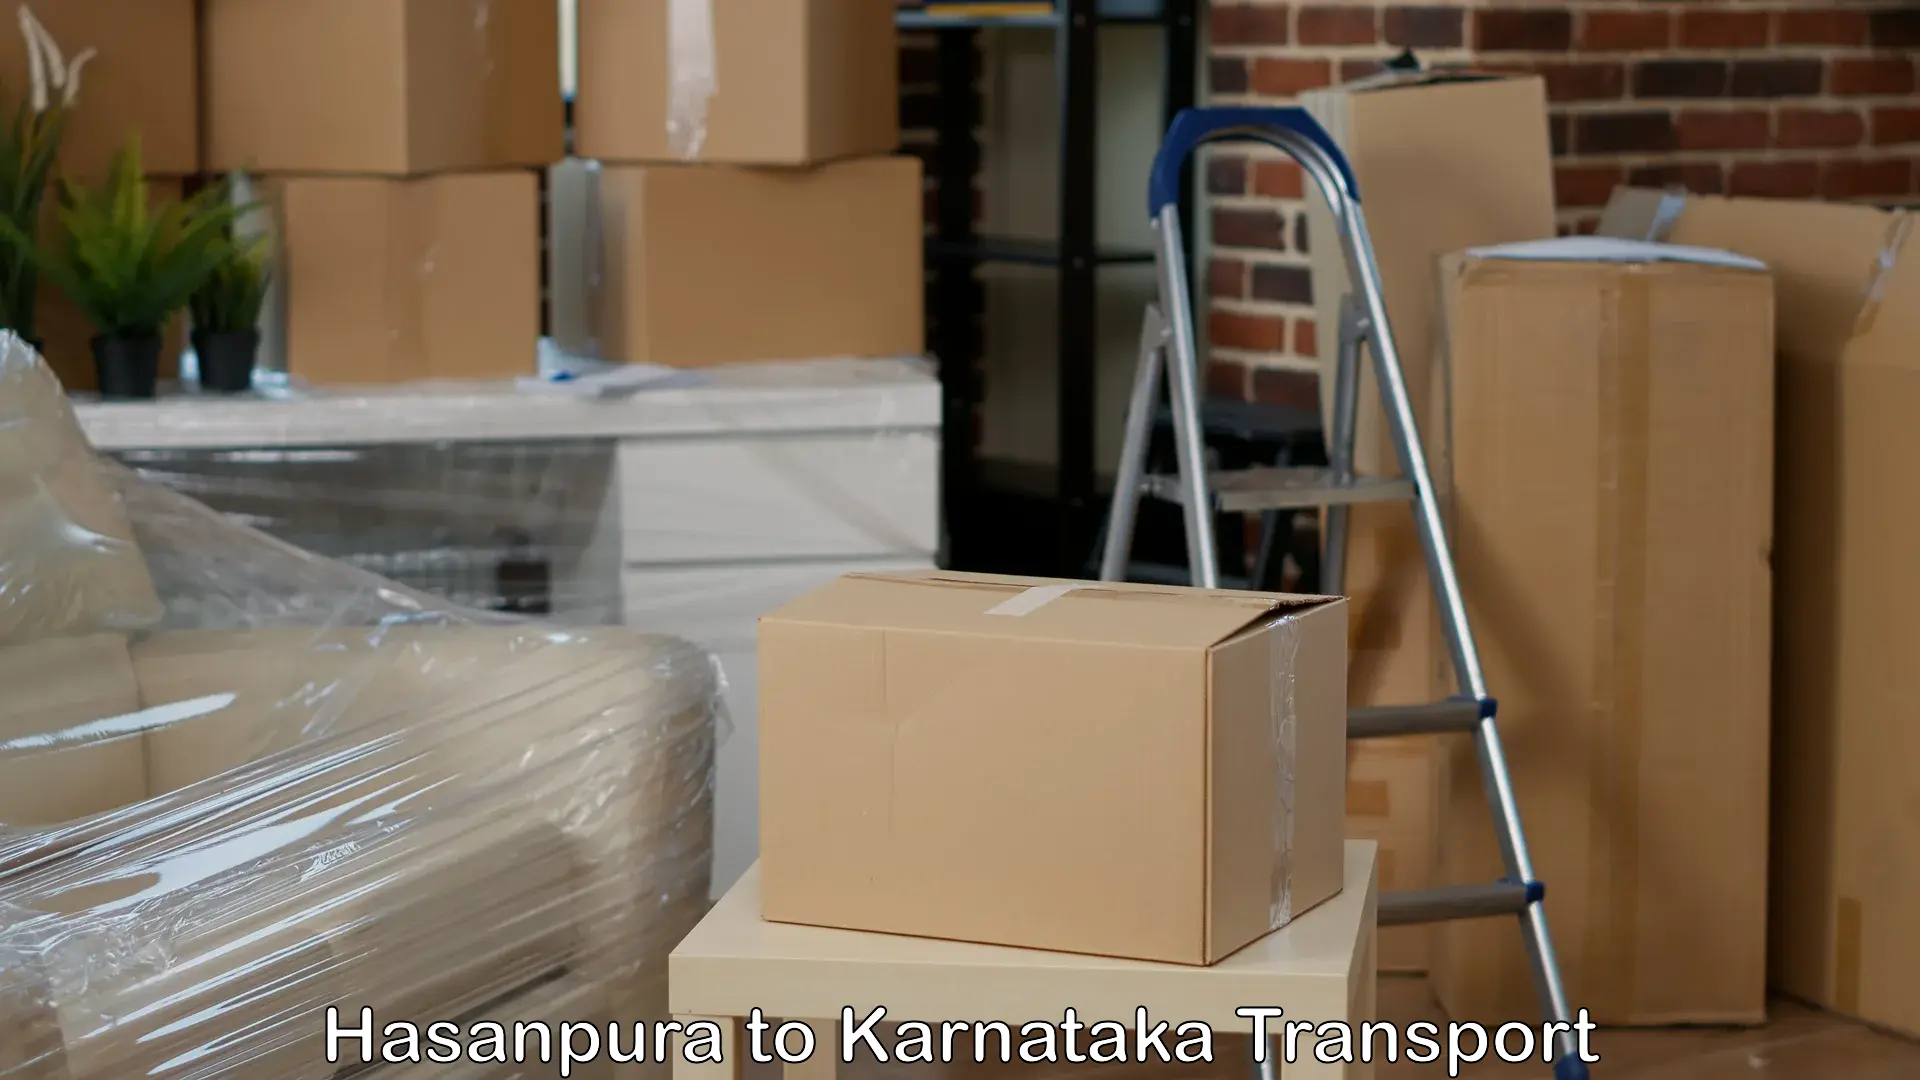 Shipping services in Hasanpura to Laxmeshwar